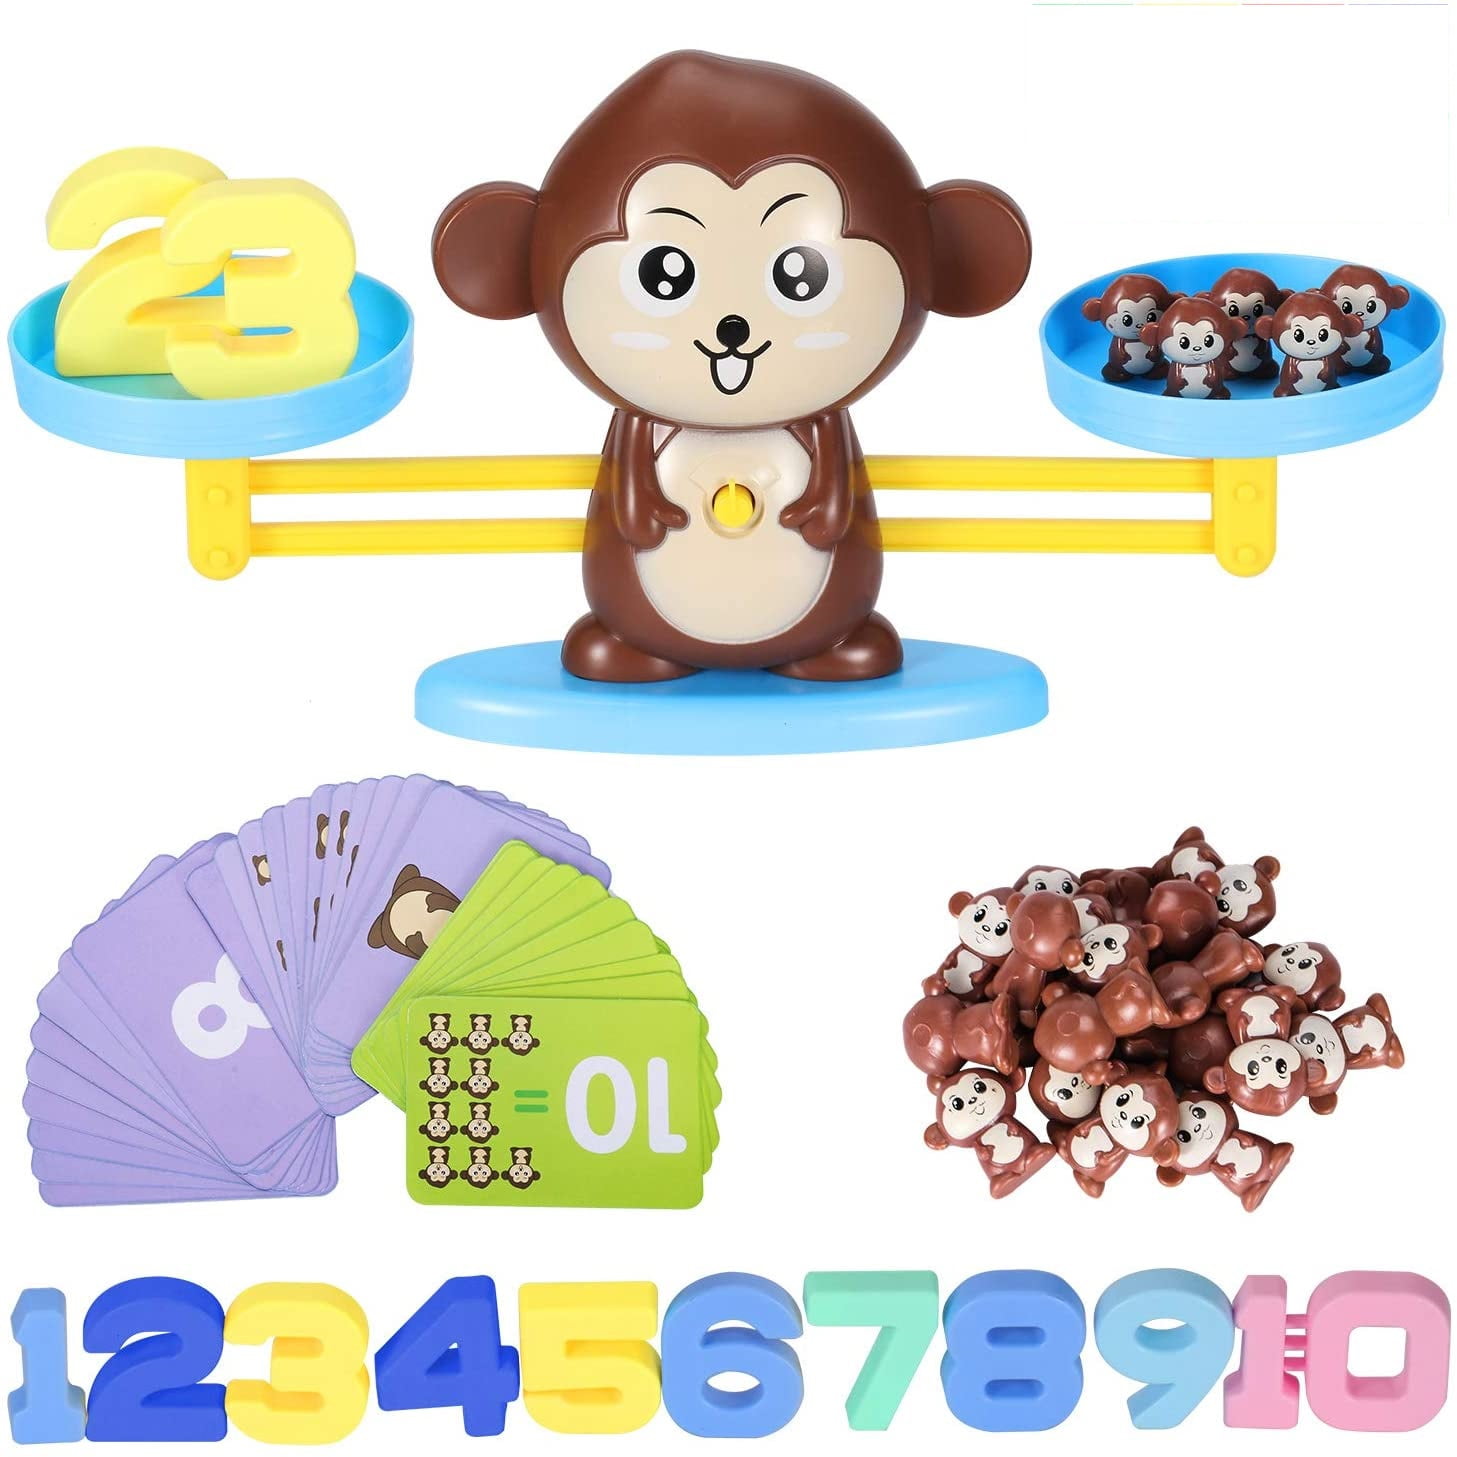 Educational Toy Gift for Kids Boy Monkey Balance Cool Math Game Fun Learning 